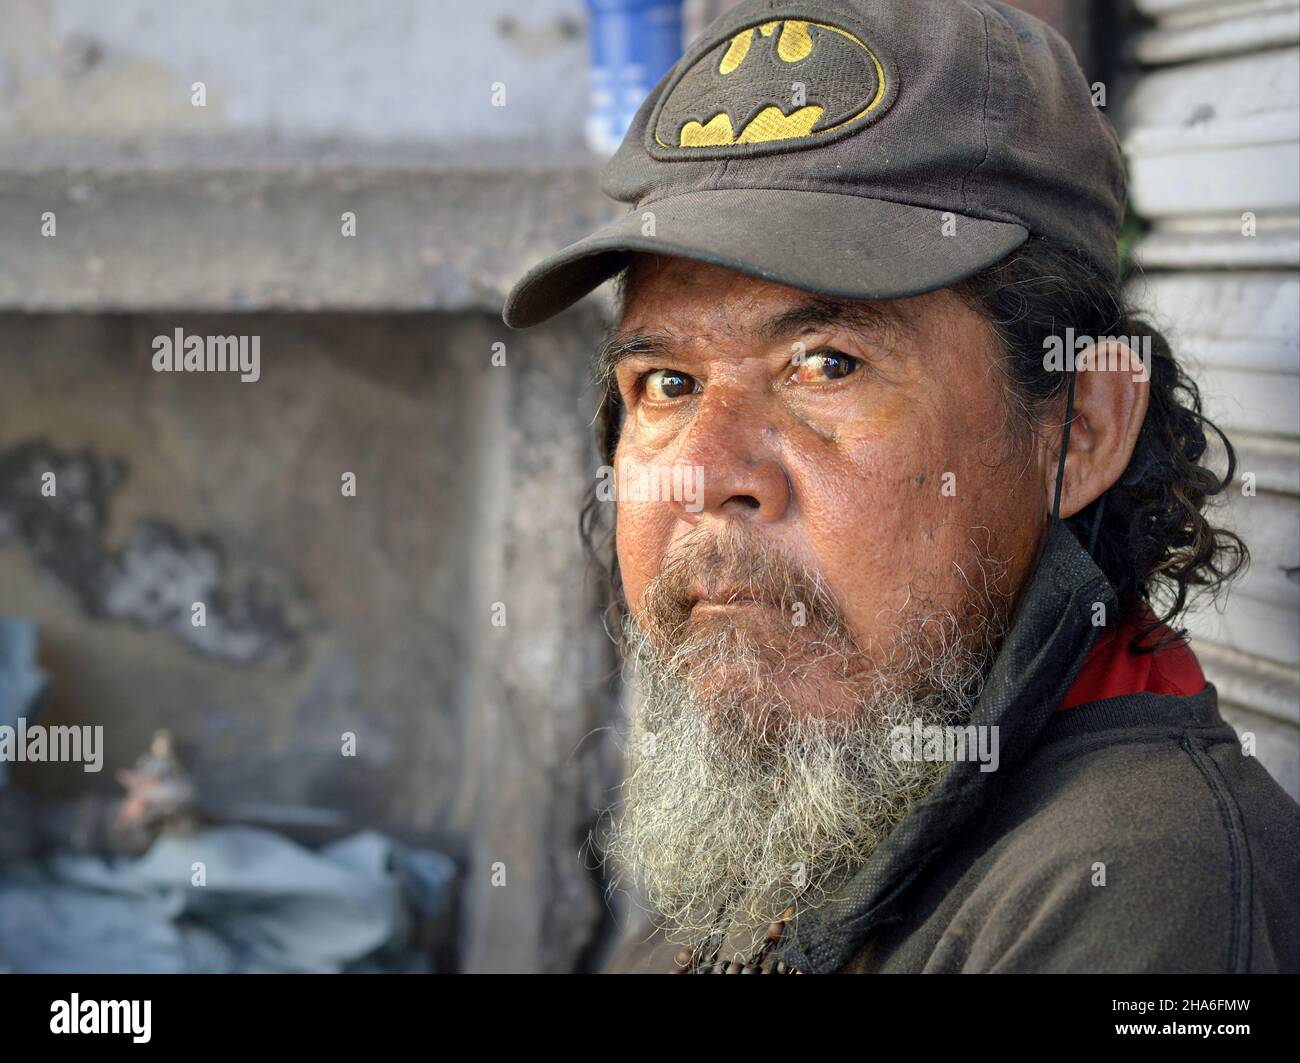 Elderly rugged homeless Mexican man with grey beard and disheveled hair wears a worn baseball cap and looks at the viewer. Stock Photo